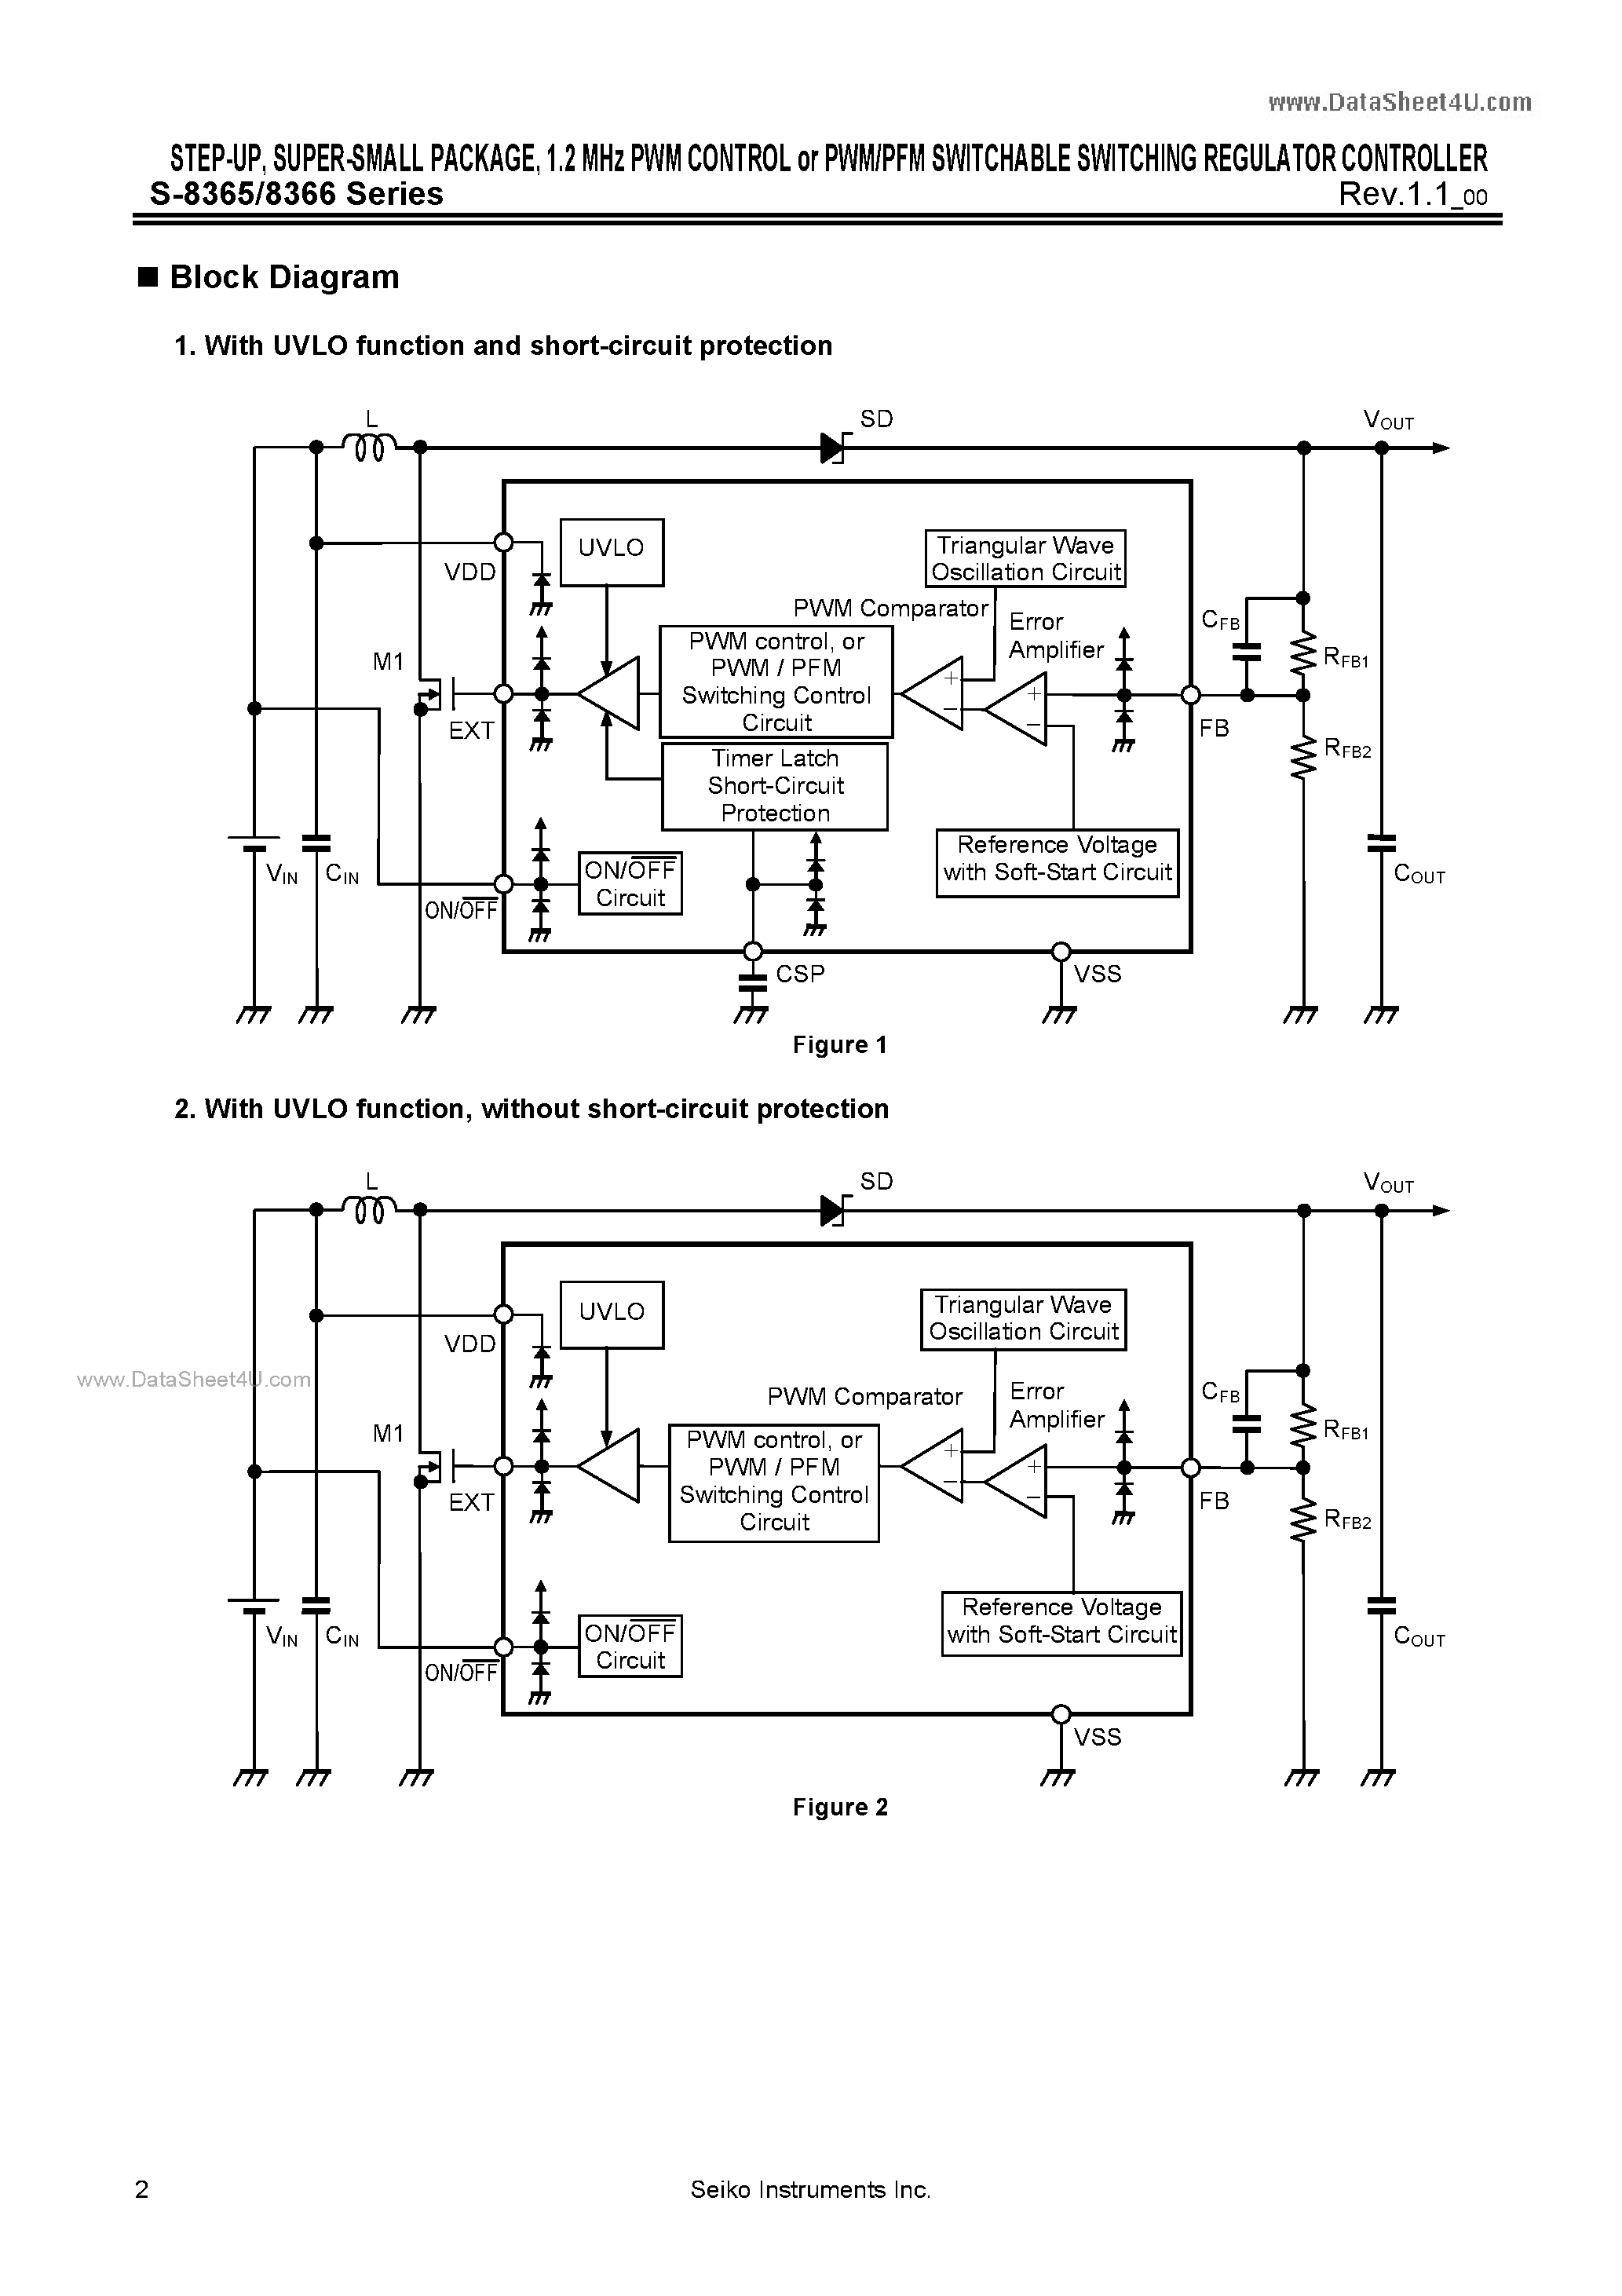 Даташит S-8365 - (S-8365 / S-8366) 1.2 MHz PWM CONTROL or PWM/PFM SWITCHABLE SWITCHING REGULATOR CONTROLLER страница 2